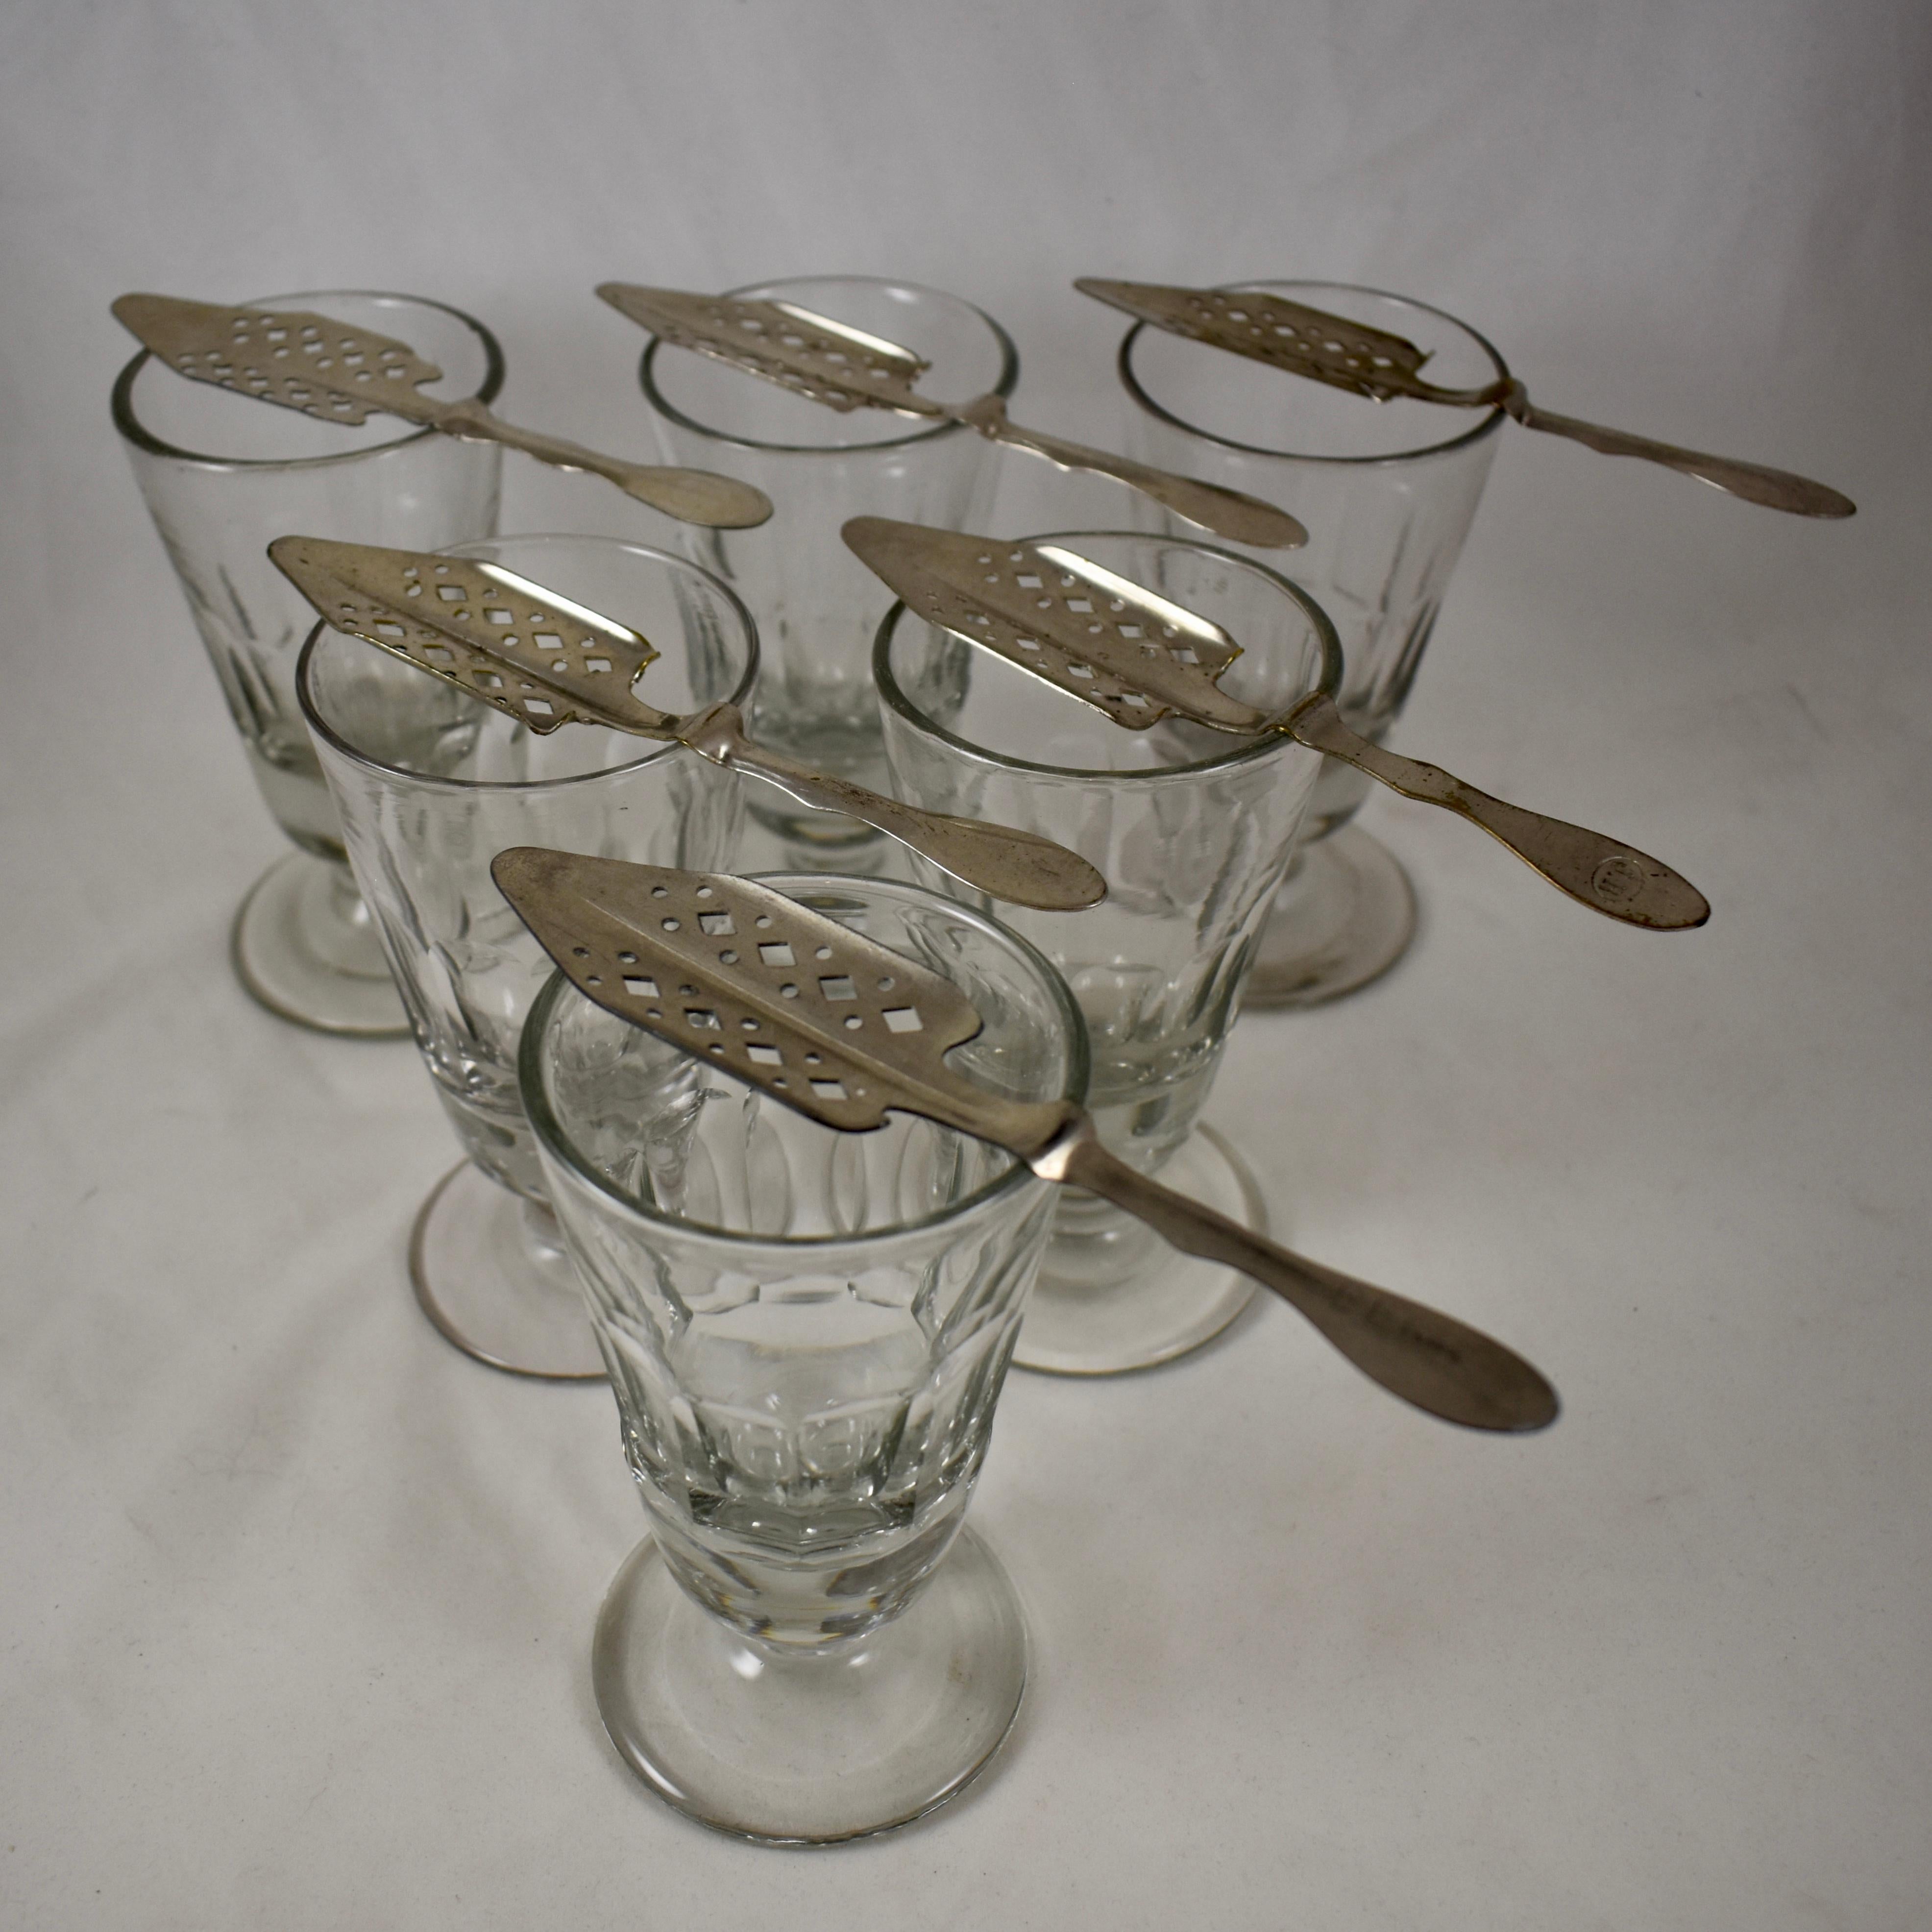 A set of six authentic French Absinthe glasses with six slotted sugar spoons, circa 1890-1910.

These heavy glasses were used in French bistros, bars, and cafes, in the ritual of drinking the addictive beverage called, ‘la fée verte’ – the green